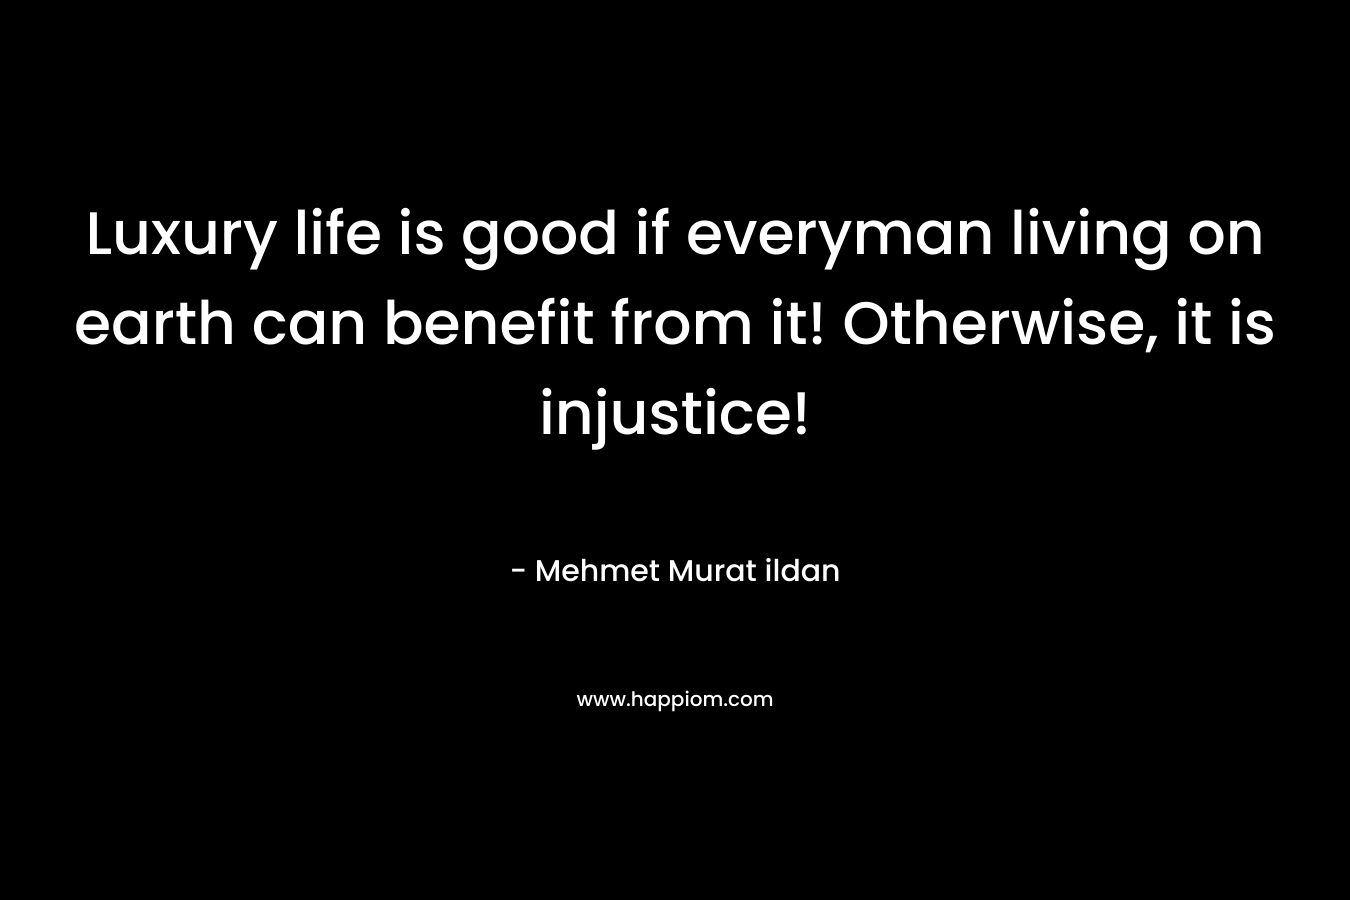 Luxury life is good if everyman living on earth can benefit from it! Otherwise, it is injustice! – Mehmet Murat ildan